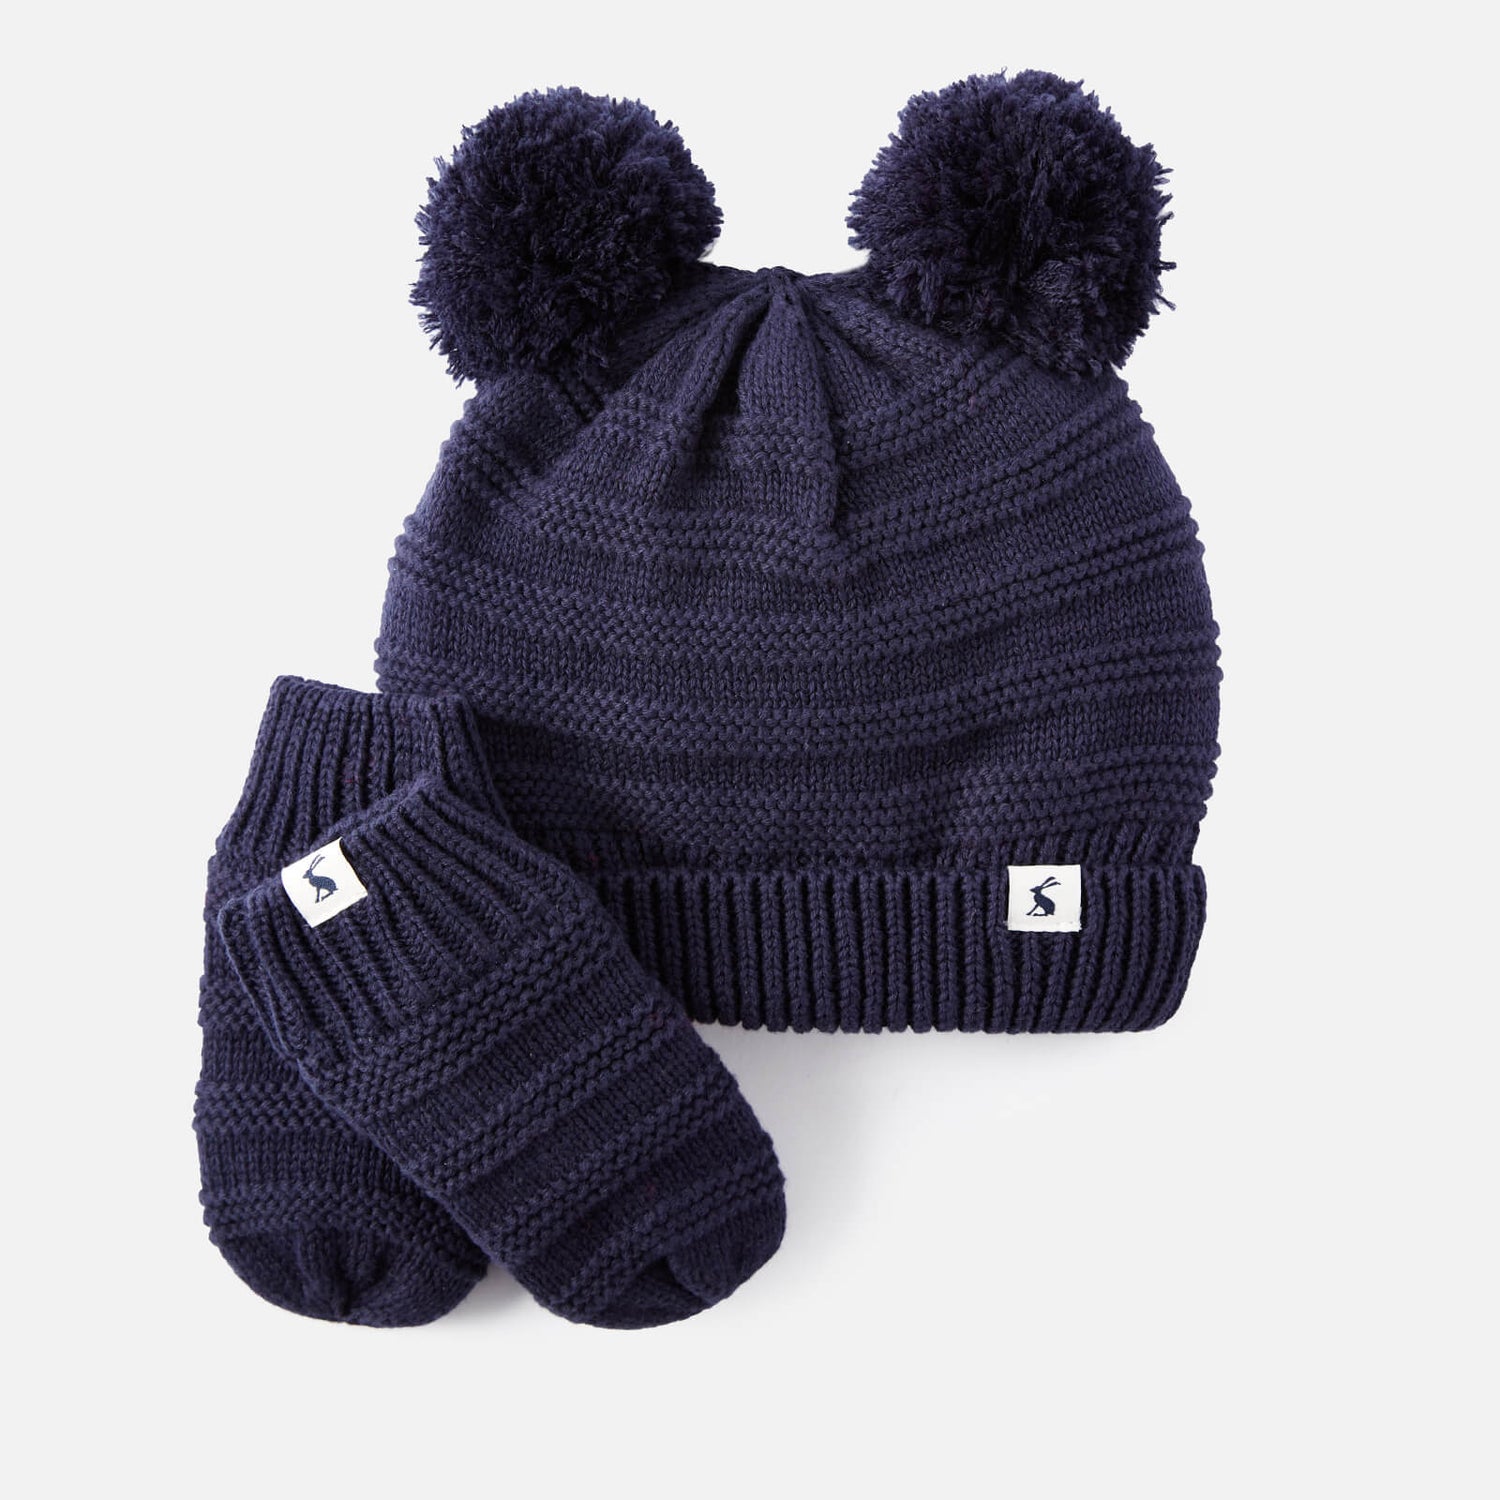 Joules Baby Pompom Knitted Hat and Gloves Set - 12-24 Months